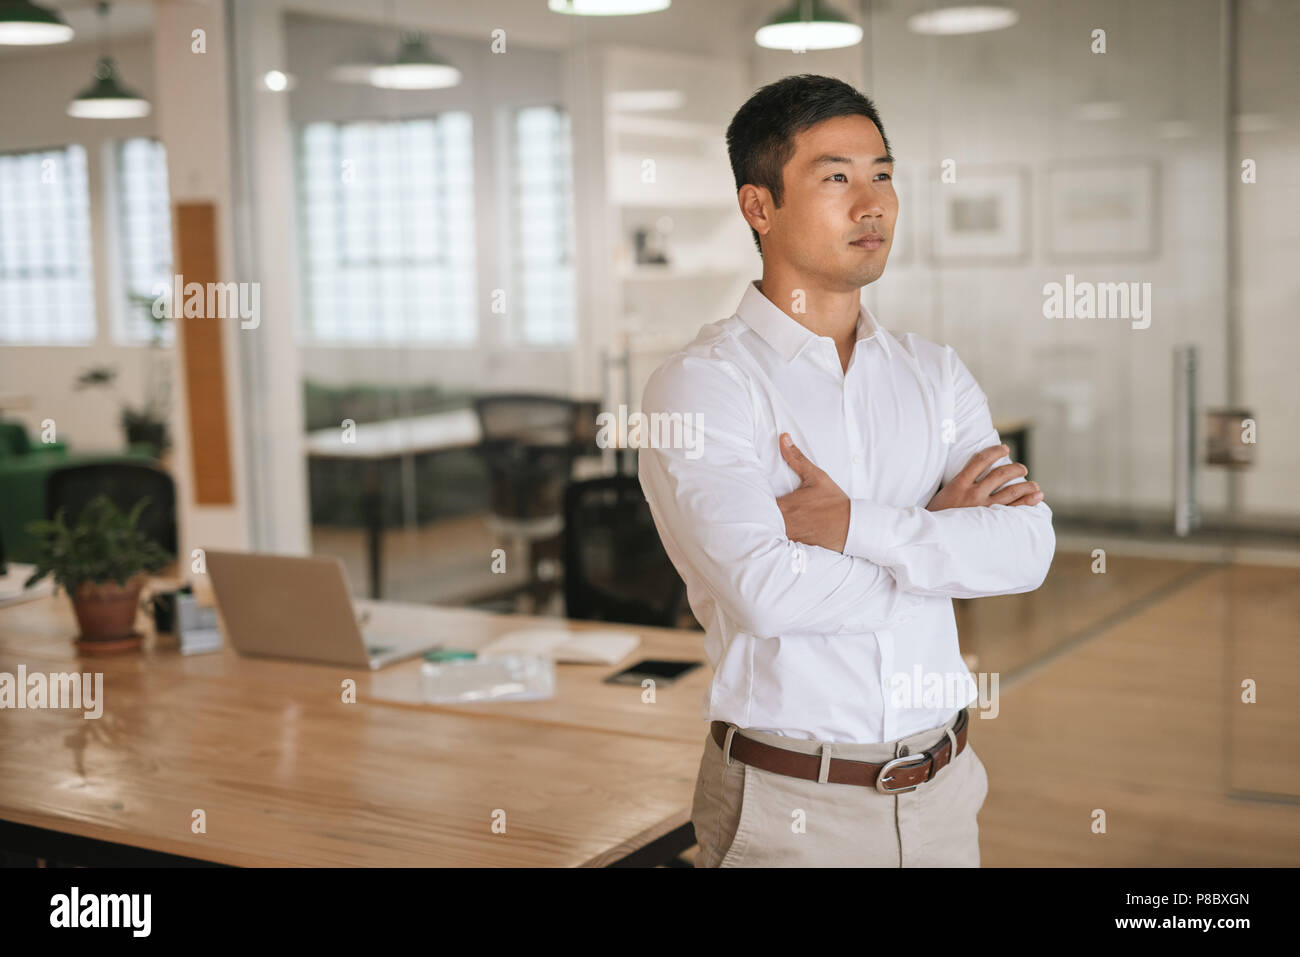 Focused Asian businessman standing in an office deep in thought Stock Photo